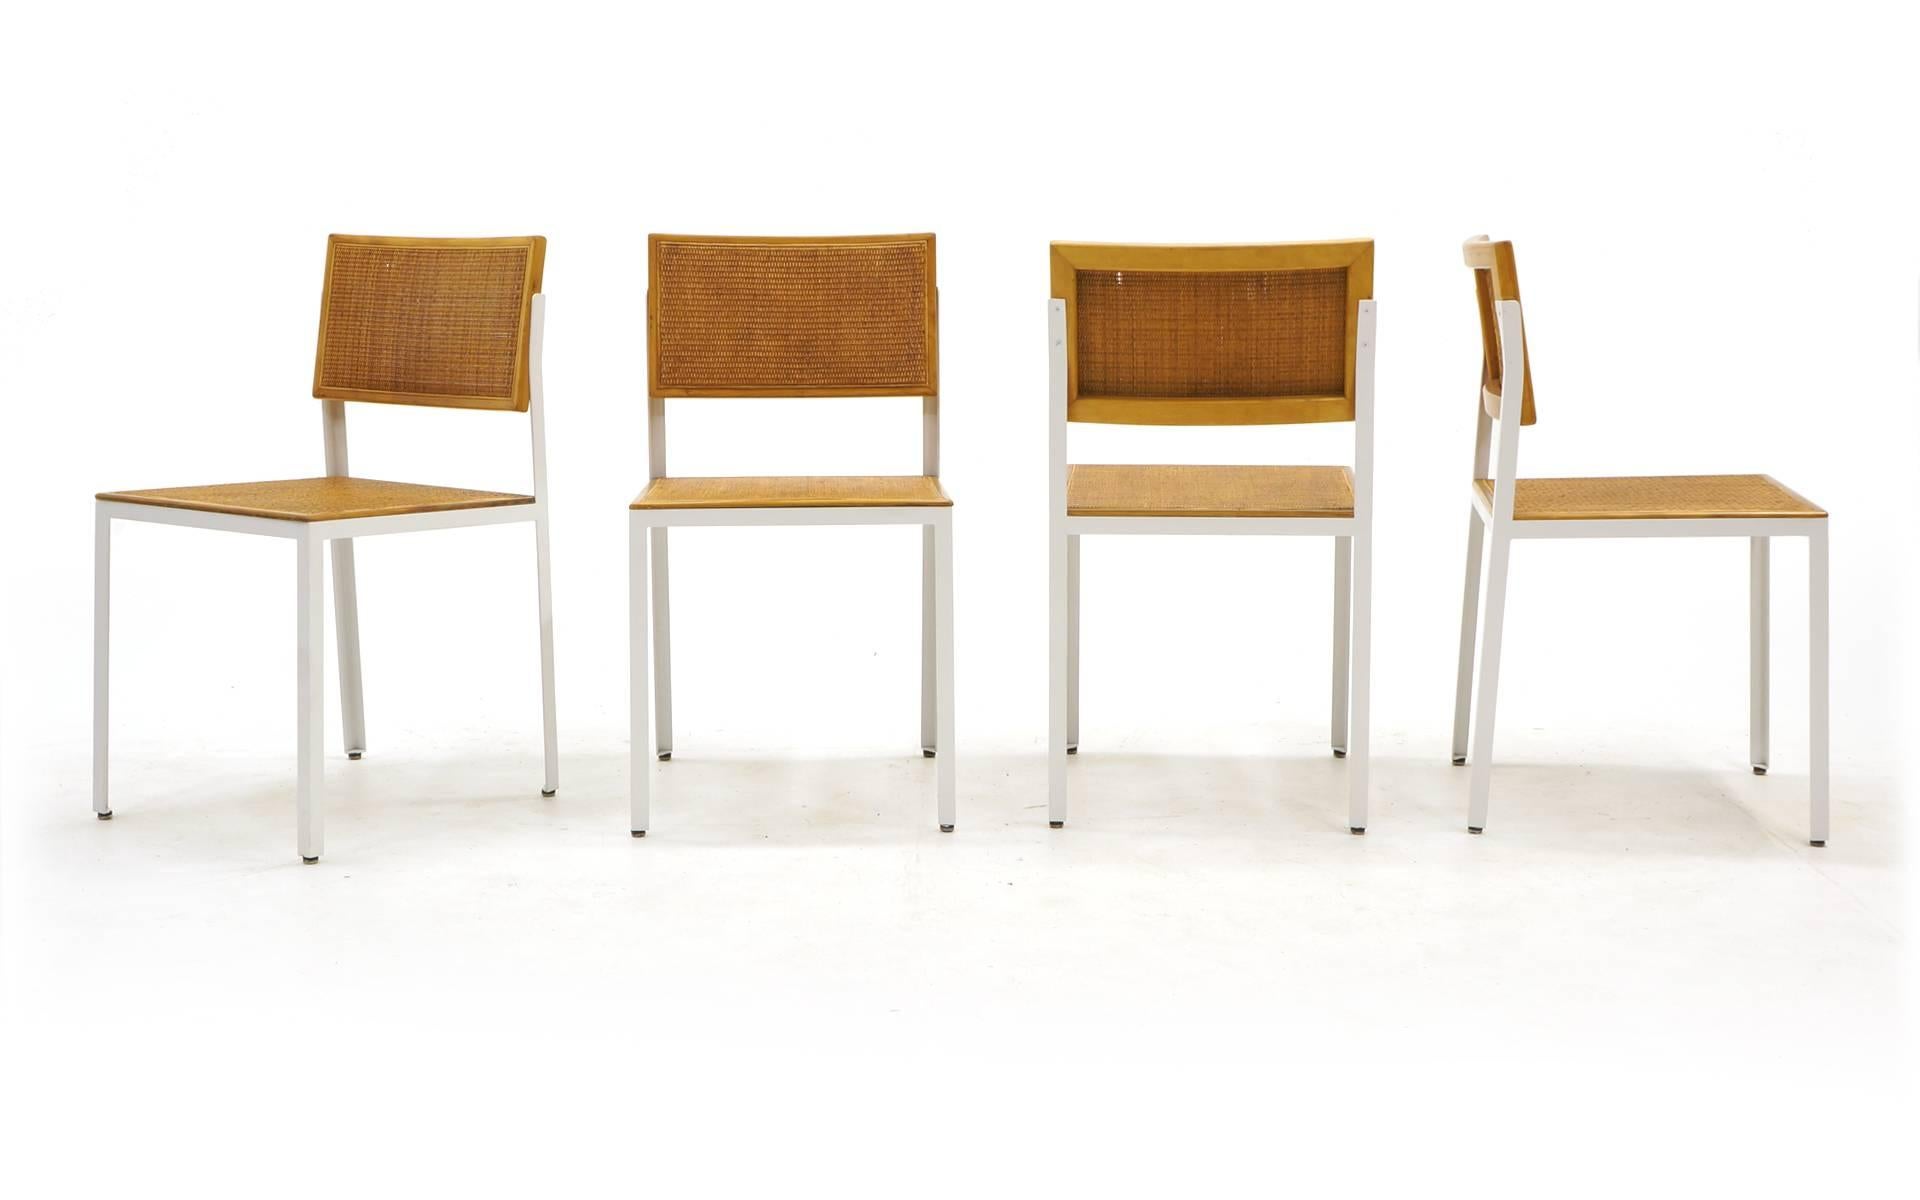 Mid-Century Modern Four Steel Frame Dining Chairs by George Nelson, White Frames, Cane Seats/Backs